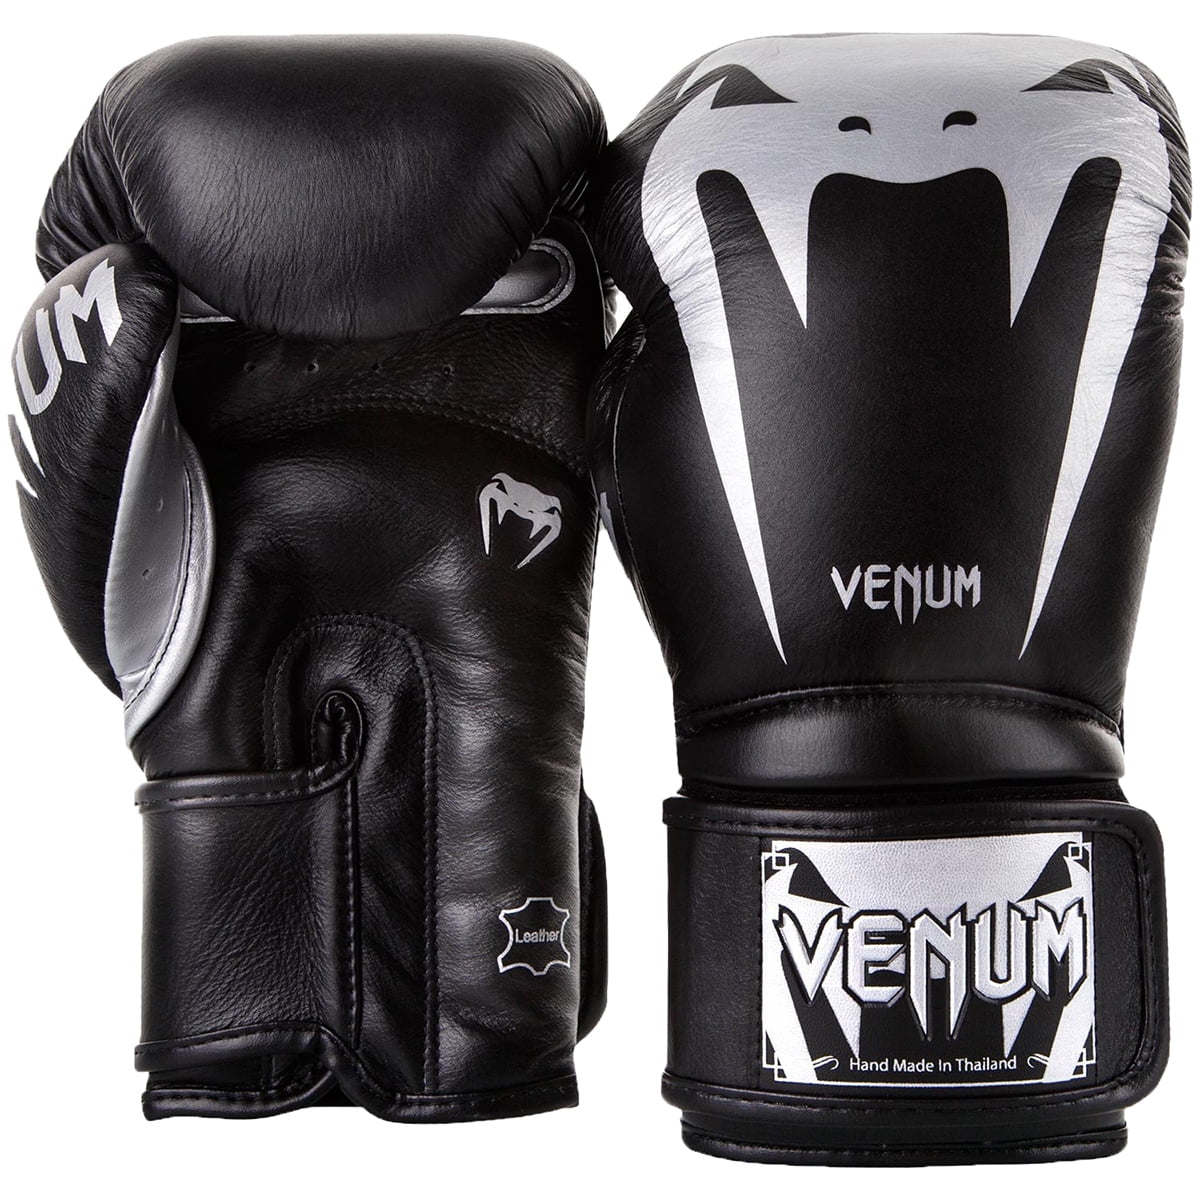 VENUM NAPPA LEATHER GIANT 3.0 BOXING GLOVES 